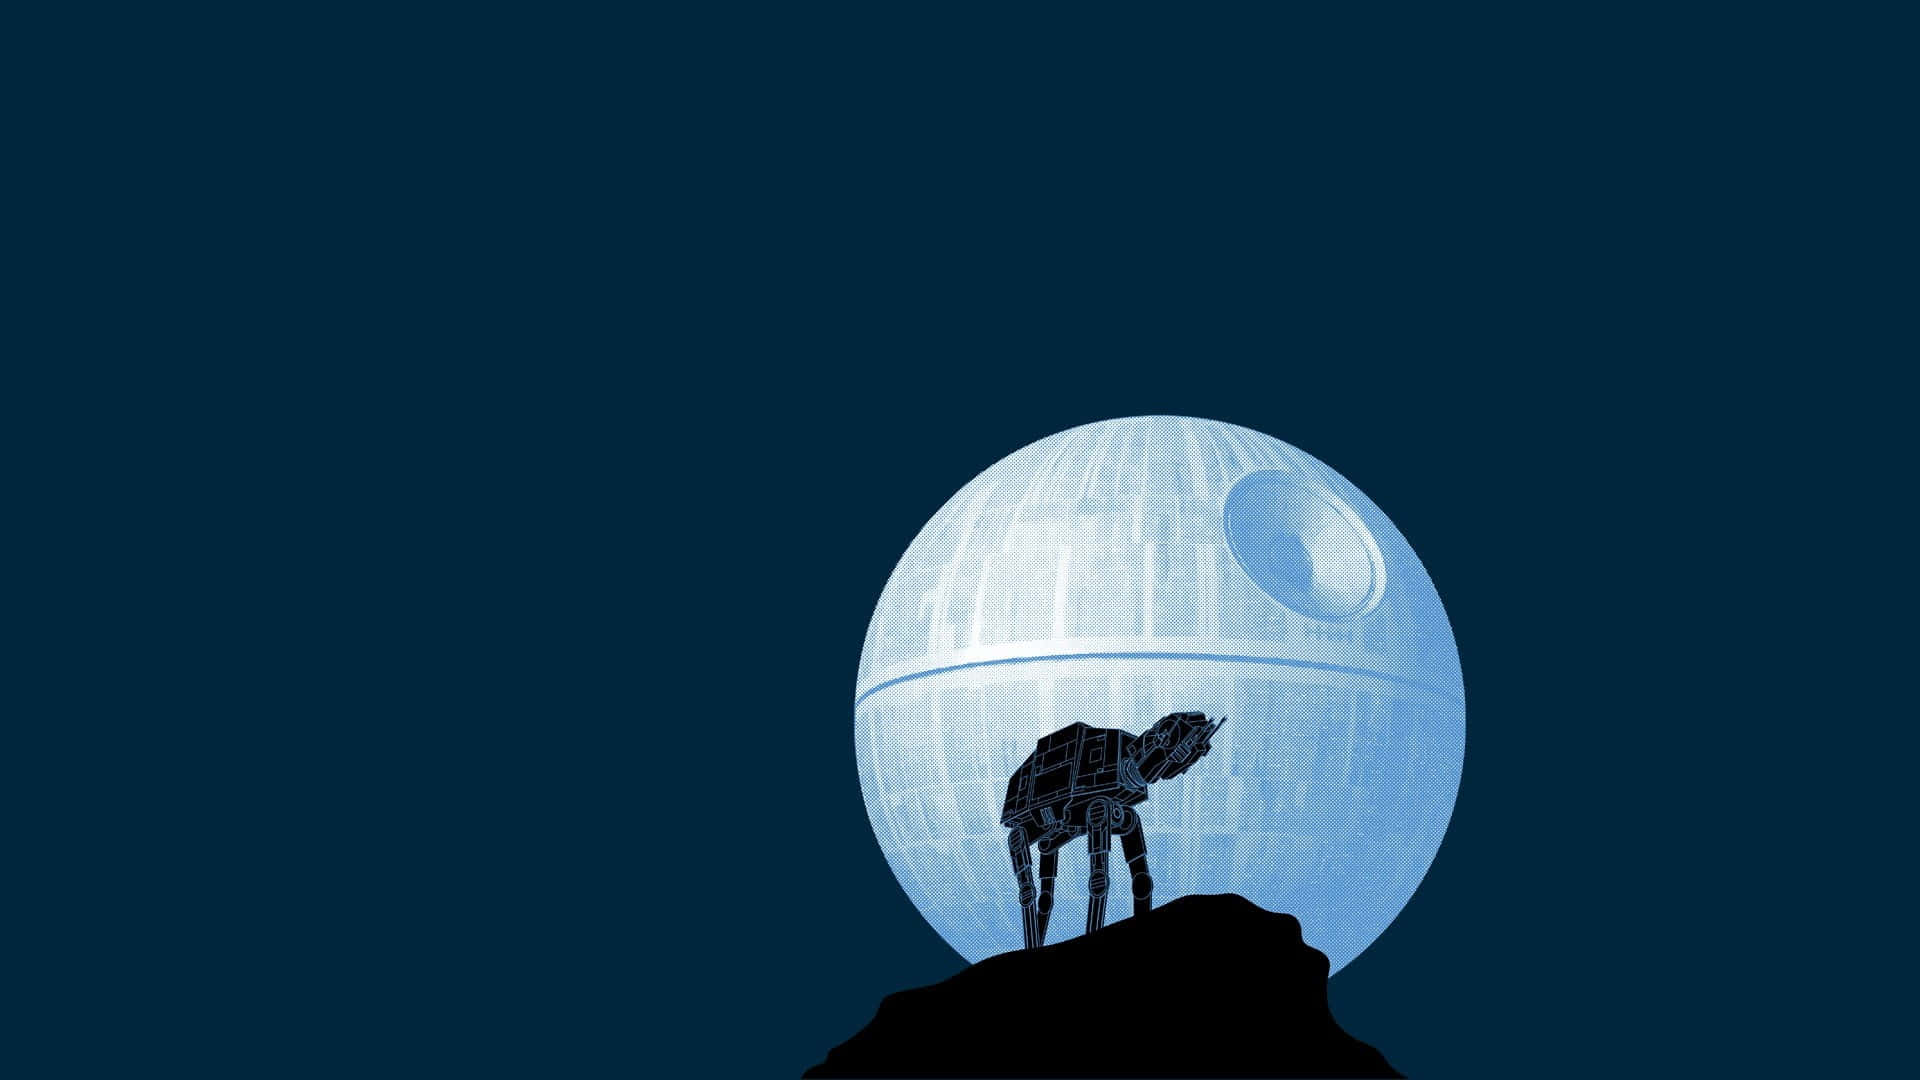 The Death Star II looms in space. Wallpaper